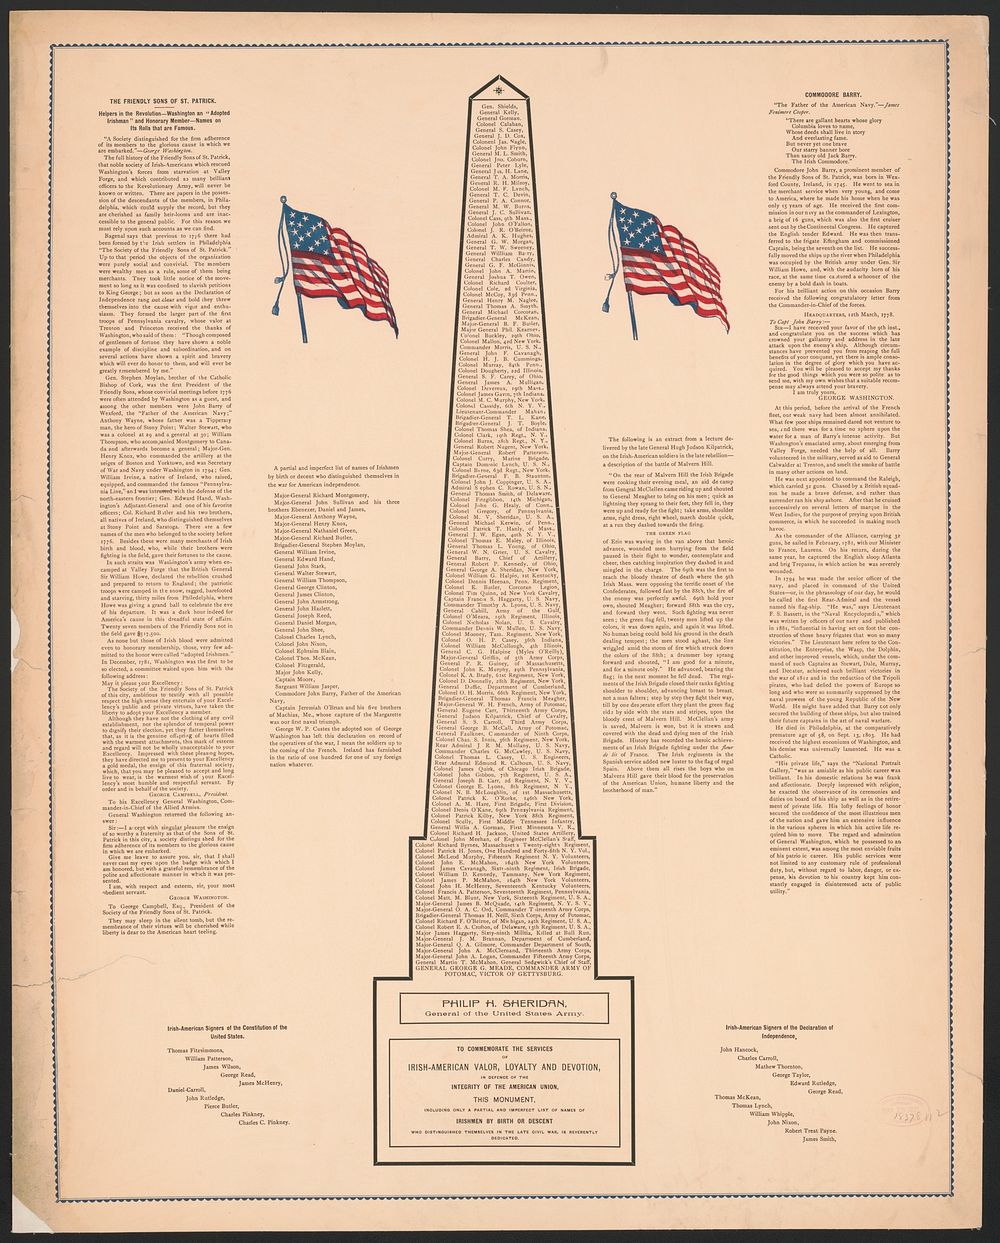 To commemorate the services of Irish-American valor, loyalty and devotion, in defence of of the integrity of the American…